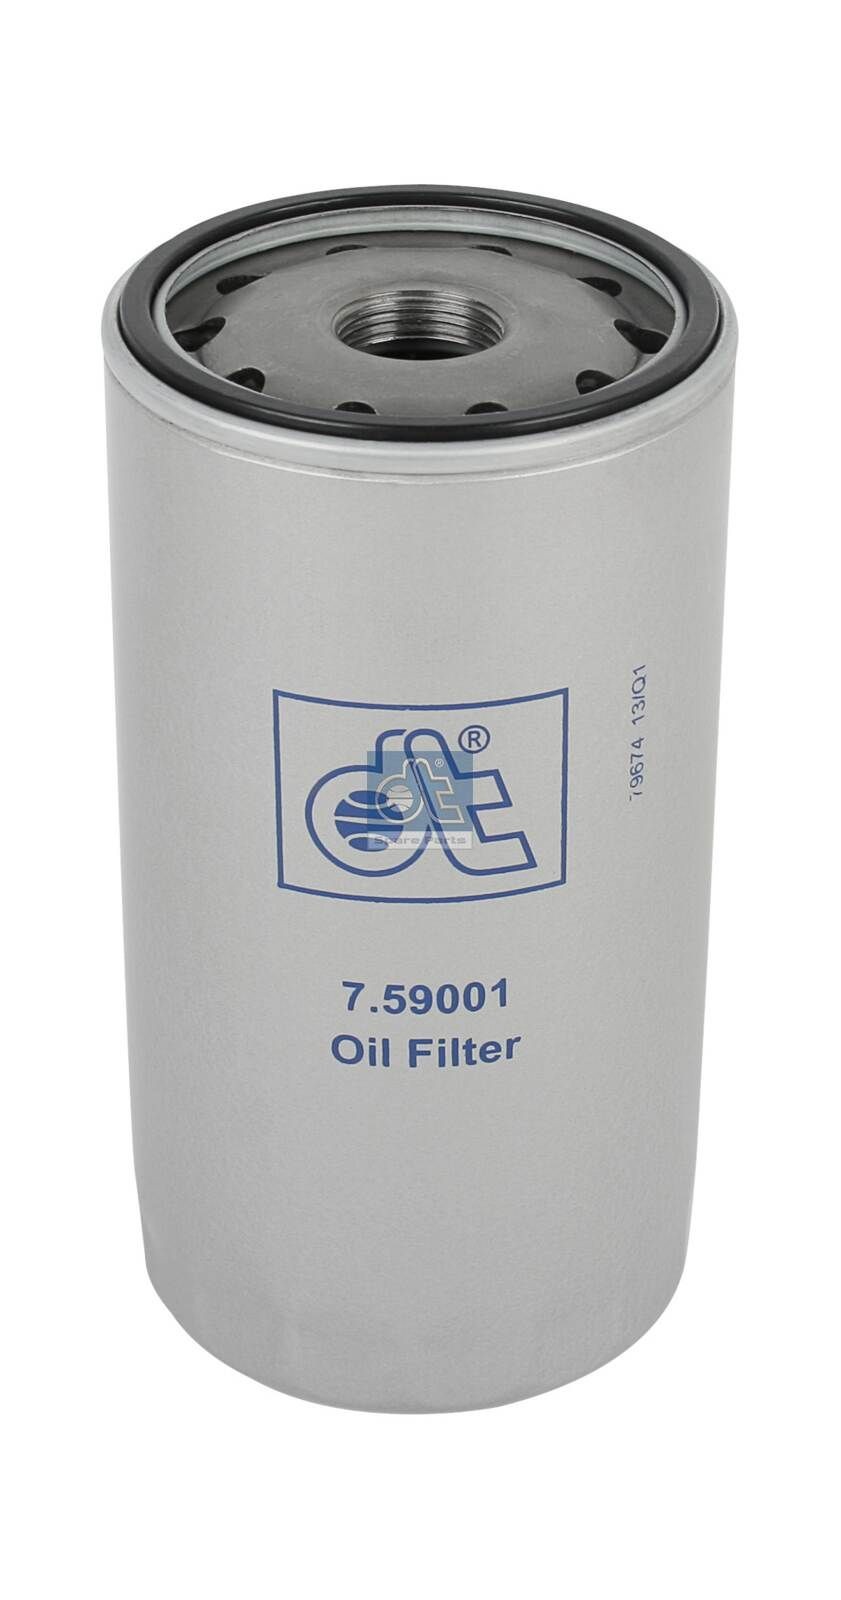 H230W DT Spare Parts 7.59001 Oil filter 50 01858 099